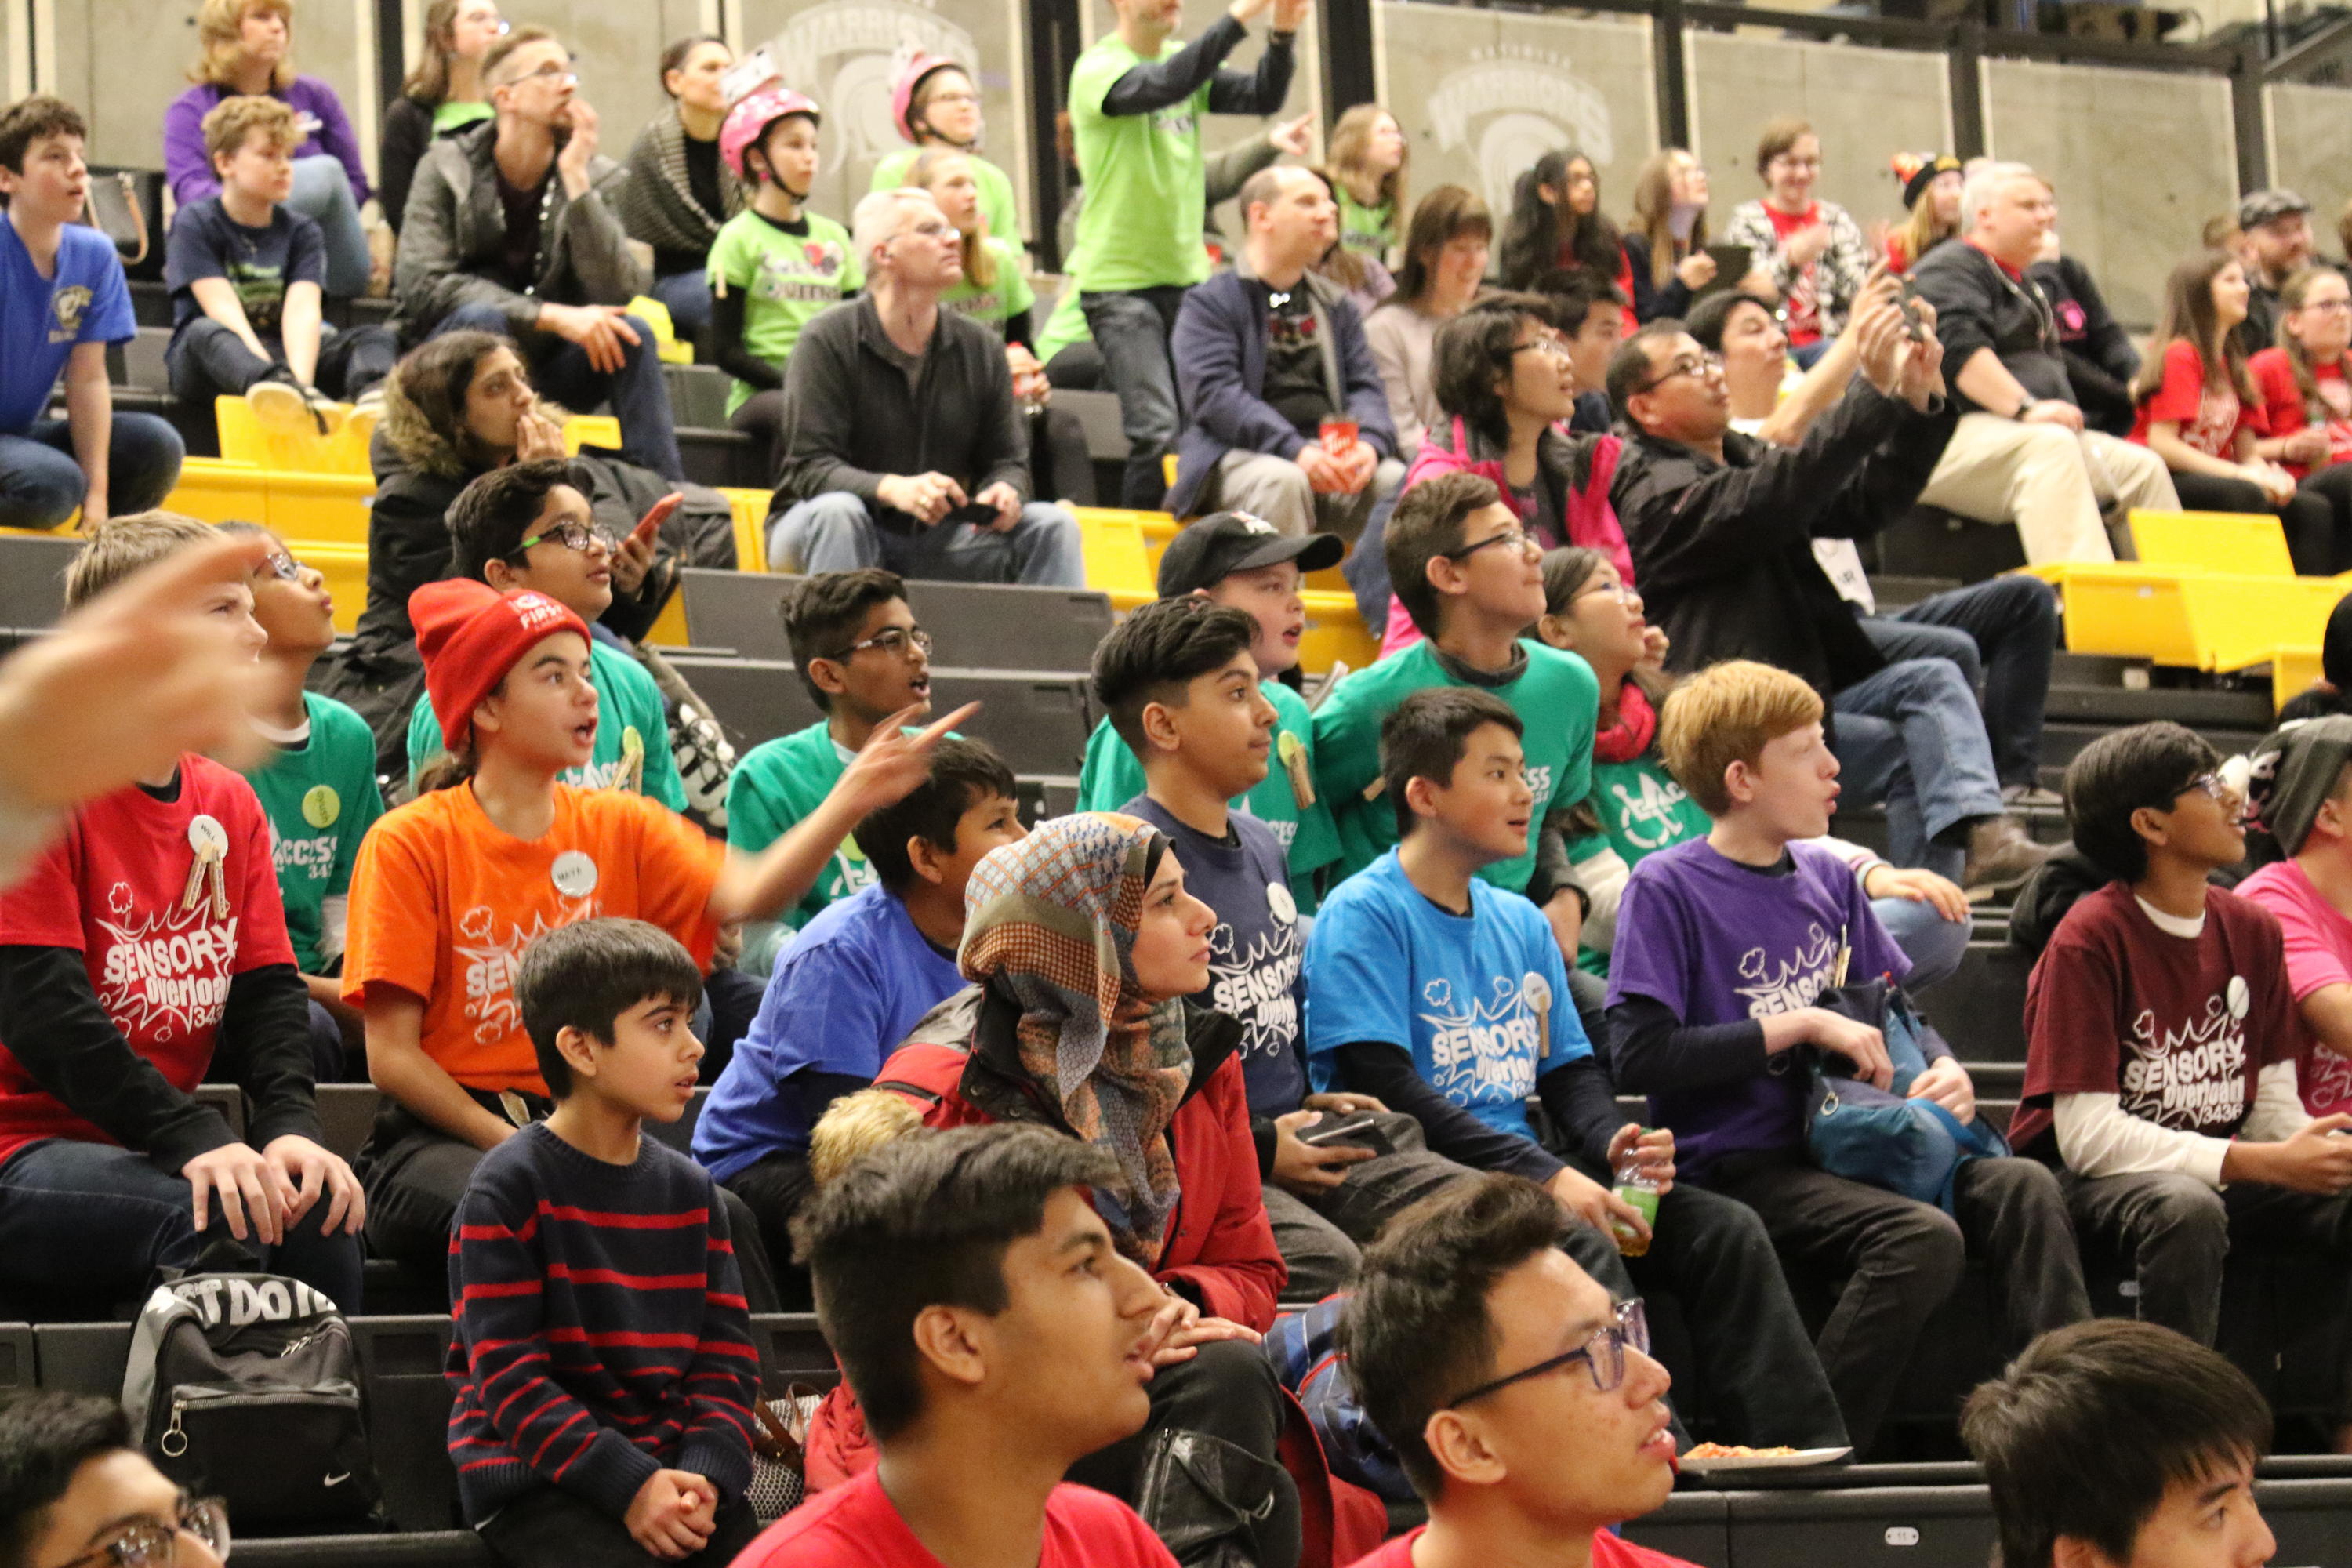 Waterloo Engineering put the pieces together for the FIRST LEGO League West Provincial Championship for children